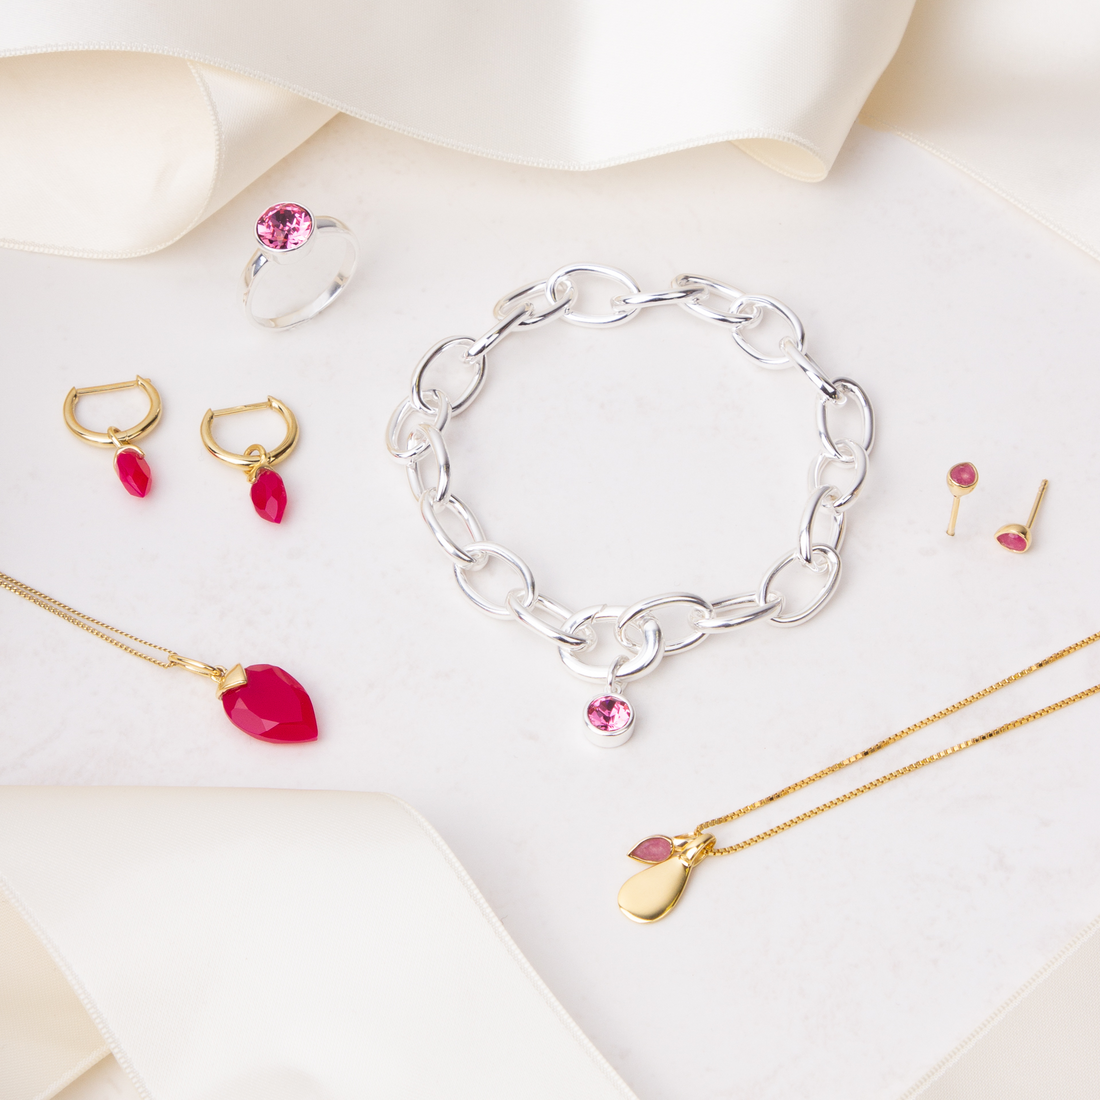 Top picks from our Crystal & Gemstone Jewellery Collection